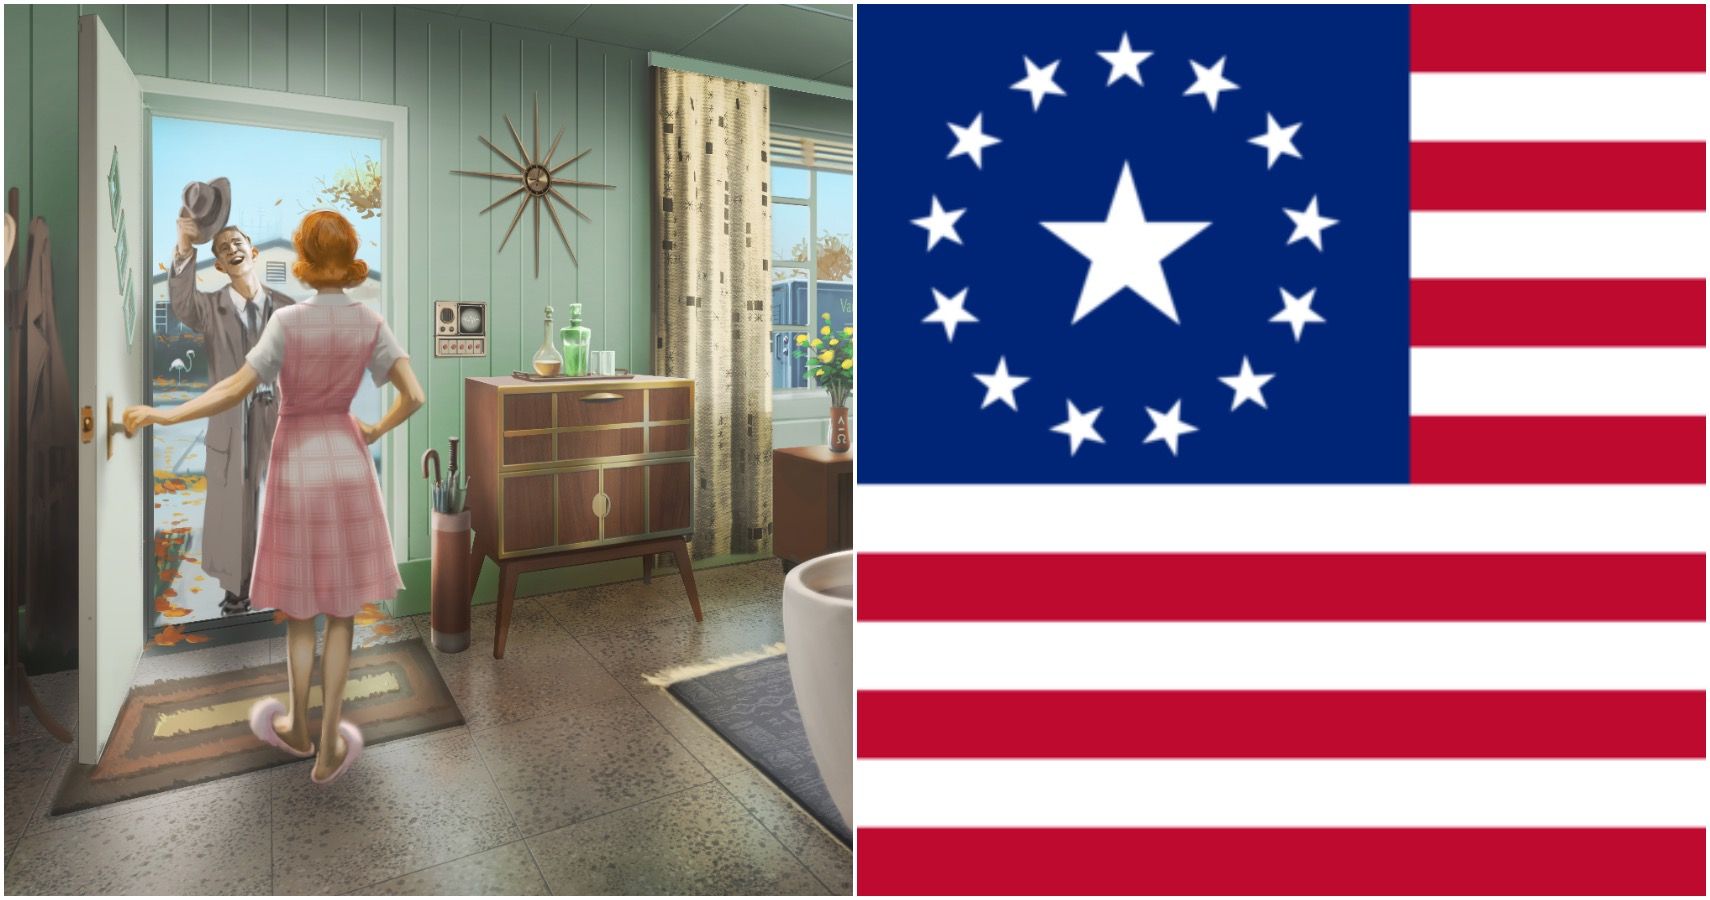 The 1950s style of the game and the new flag for the US